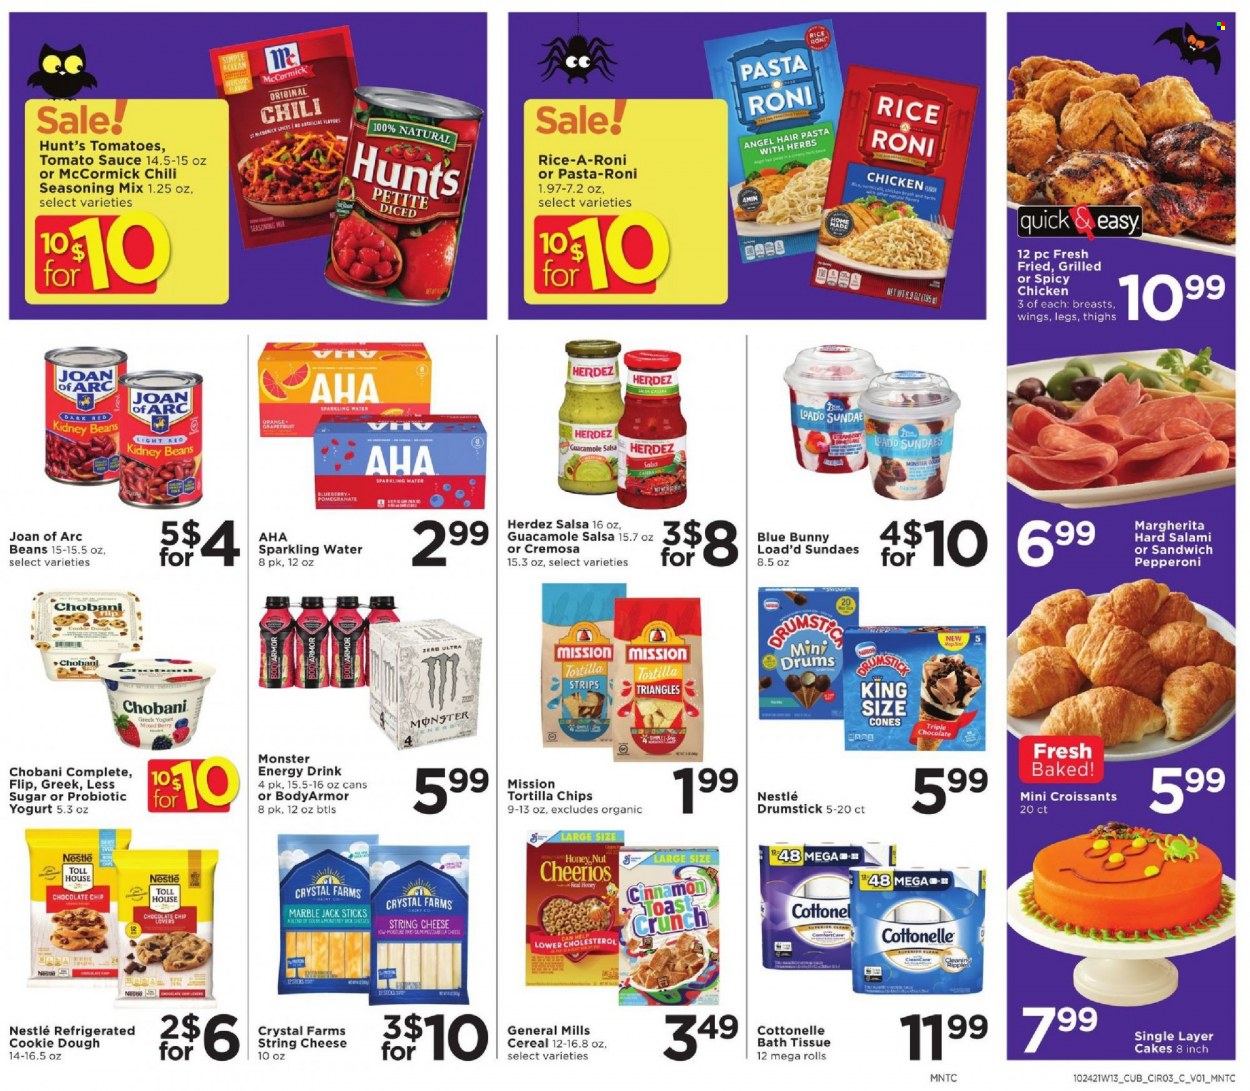 thumbnail - Cub Foods Flyer - 10/24/2021 - 10/30/2021 - Sales products - cake, croissant, beans, grapefruits, oranges, sandwich, sauce, salami, pepperoni, guacamole, string cheese, cheese, greek yoghurt, yoghurt, probiotic yoghurt, Chobani, Blue Bunny, strips, cookie dough, Nestlé, tortilla chips, chips, chicken broth, broth, tomato sauce, kidney beans, cereals, Cheerios, rice, spice, cinnamon, salsa, energy drink, Monster, sparkling water, bath tissue, Cottonelle, pomegranate. Page 3.